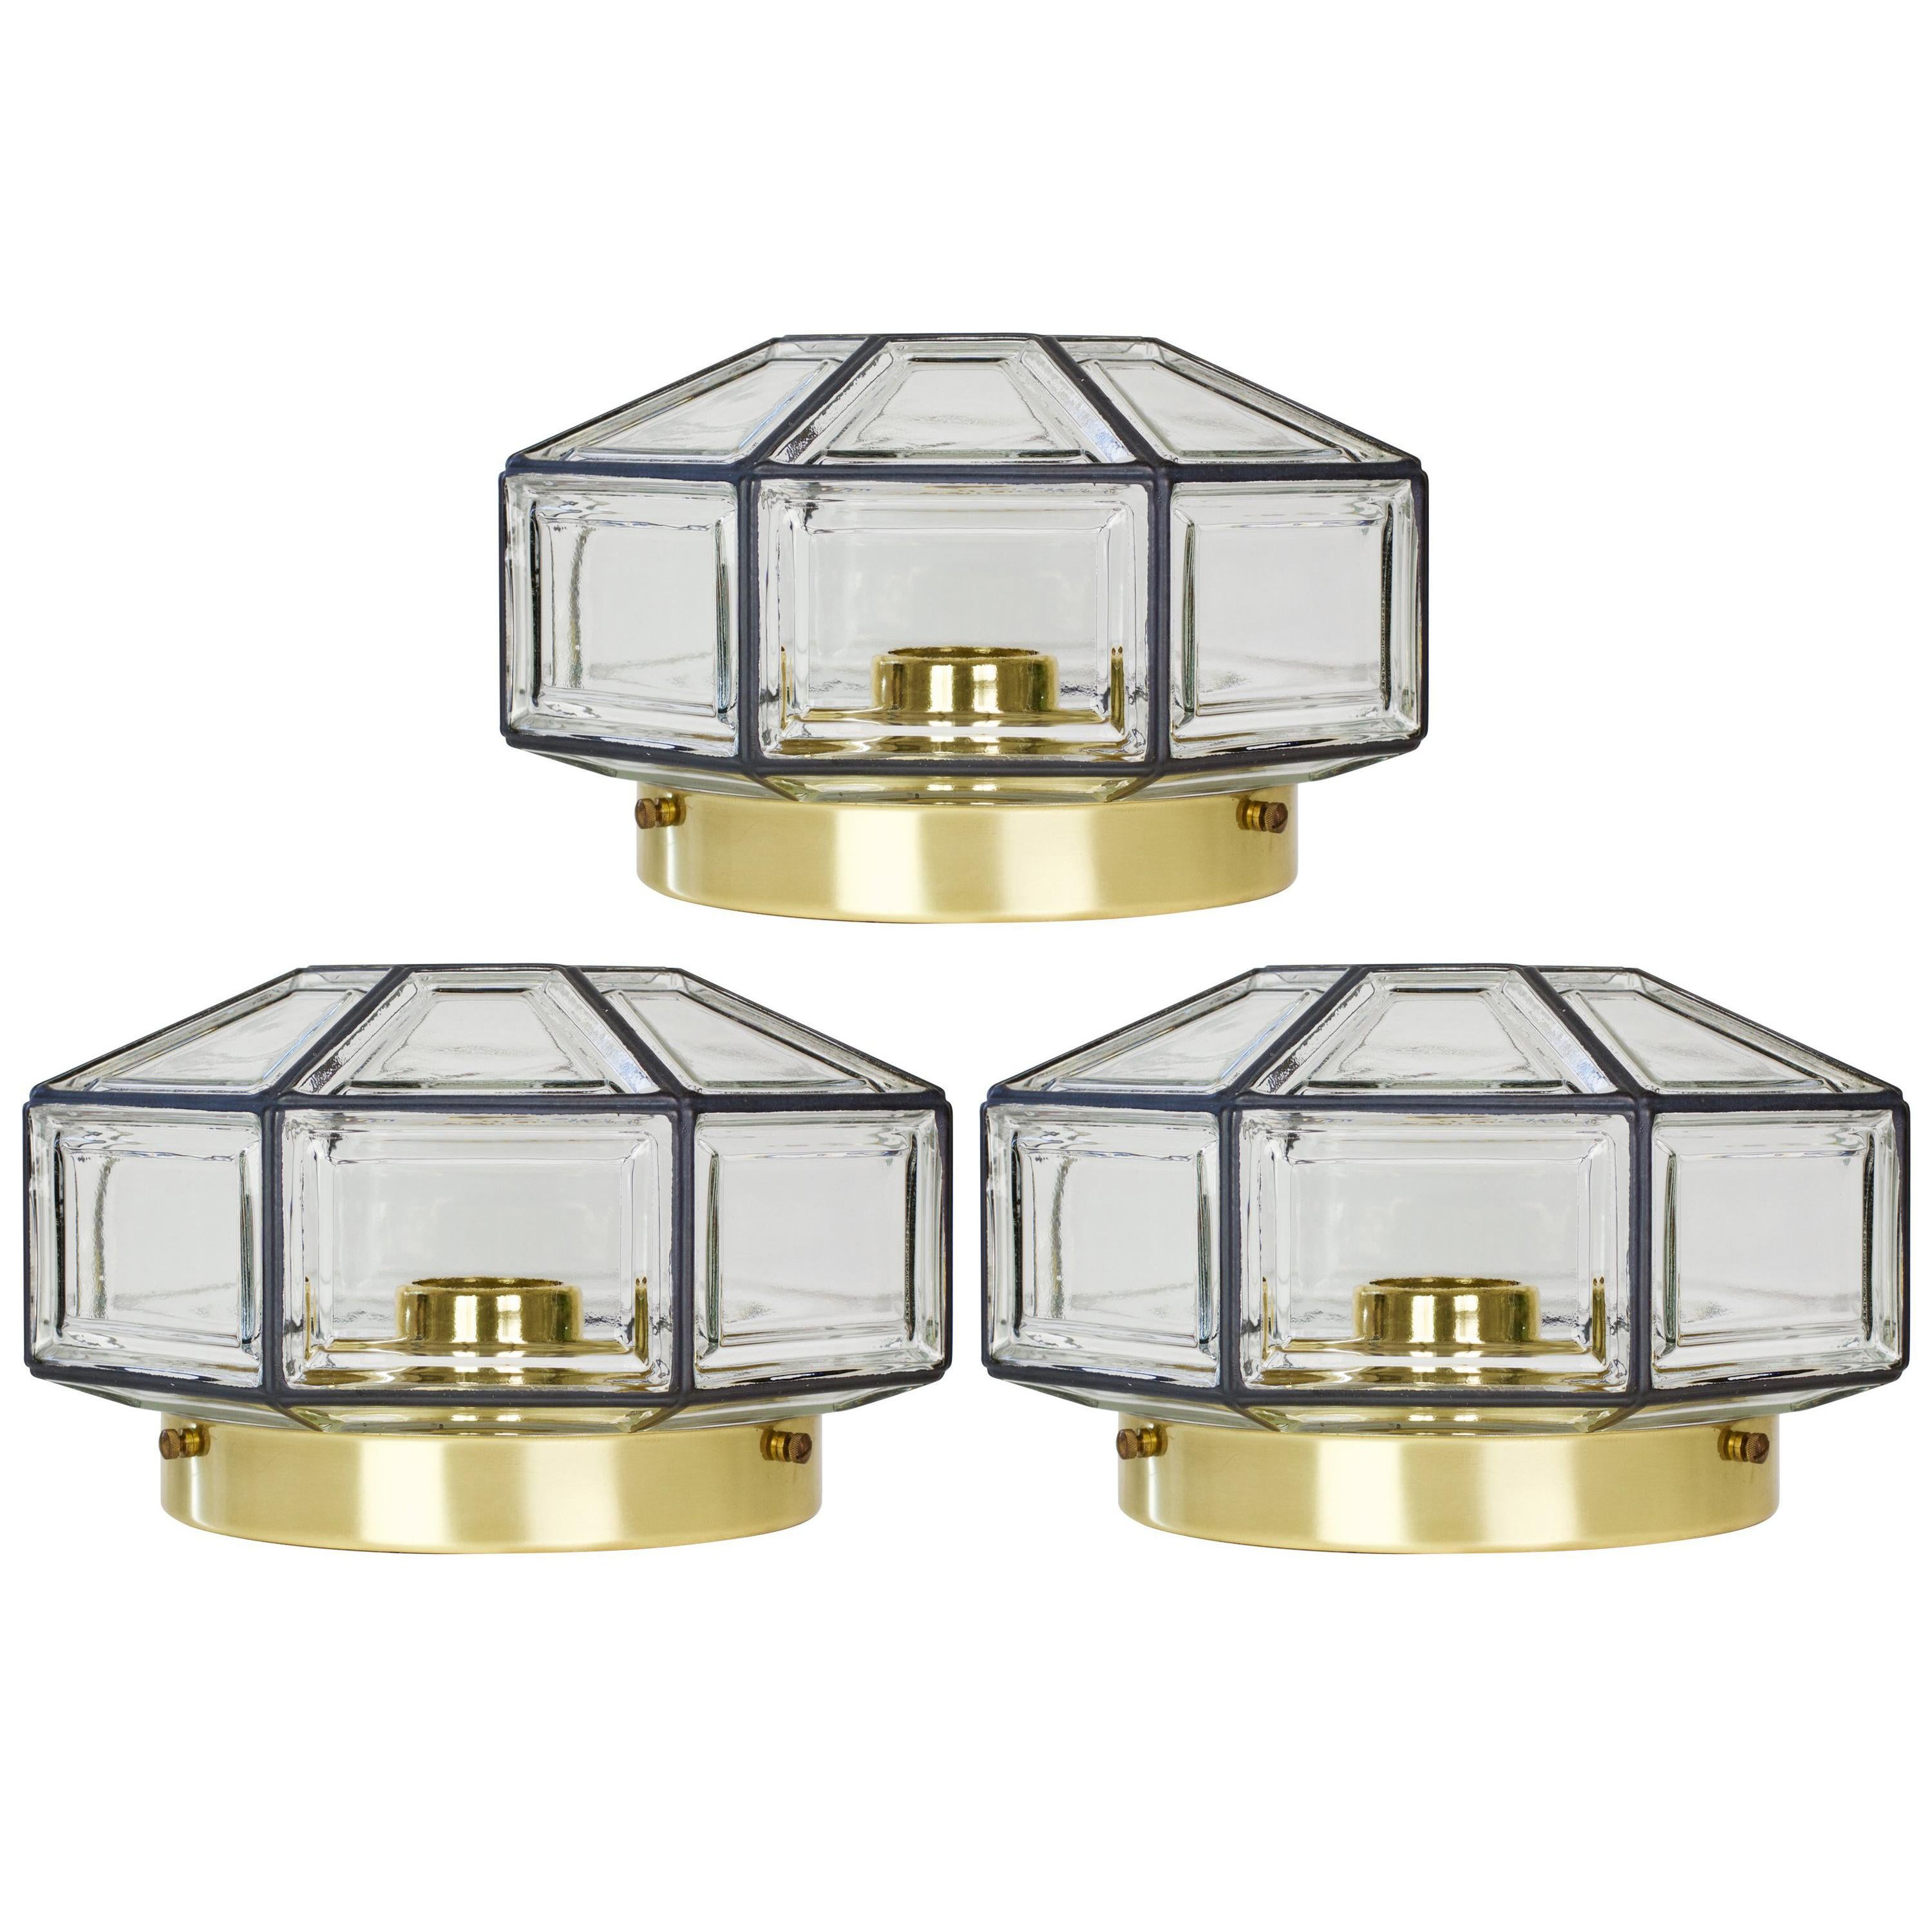 Pair of vintage midcentury octagonally shaped, Minimalist German made flushmount lamp produced by Glashütte Limburg, circa 1965. This Contemporary Art Deco and lantern style flushmount fixture casts a fantastic light when mounted on the ceiling or